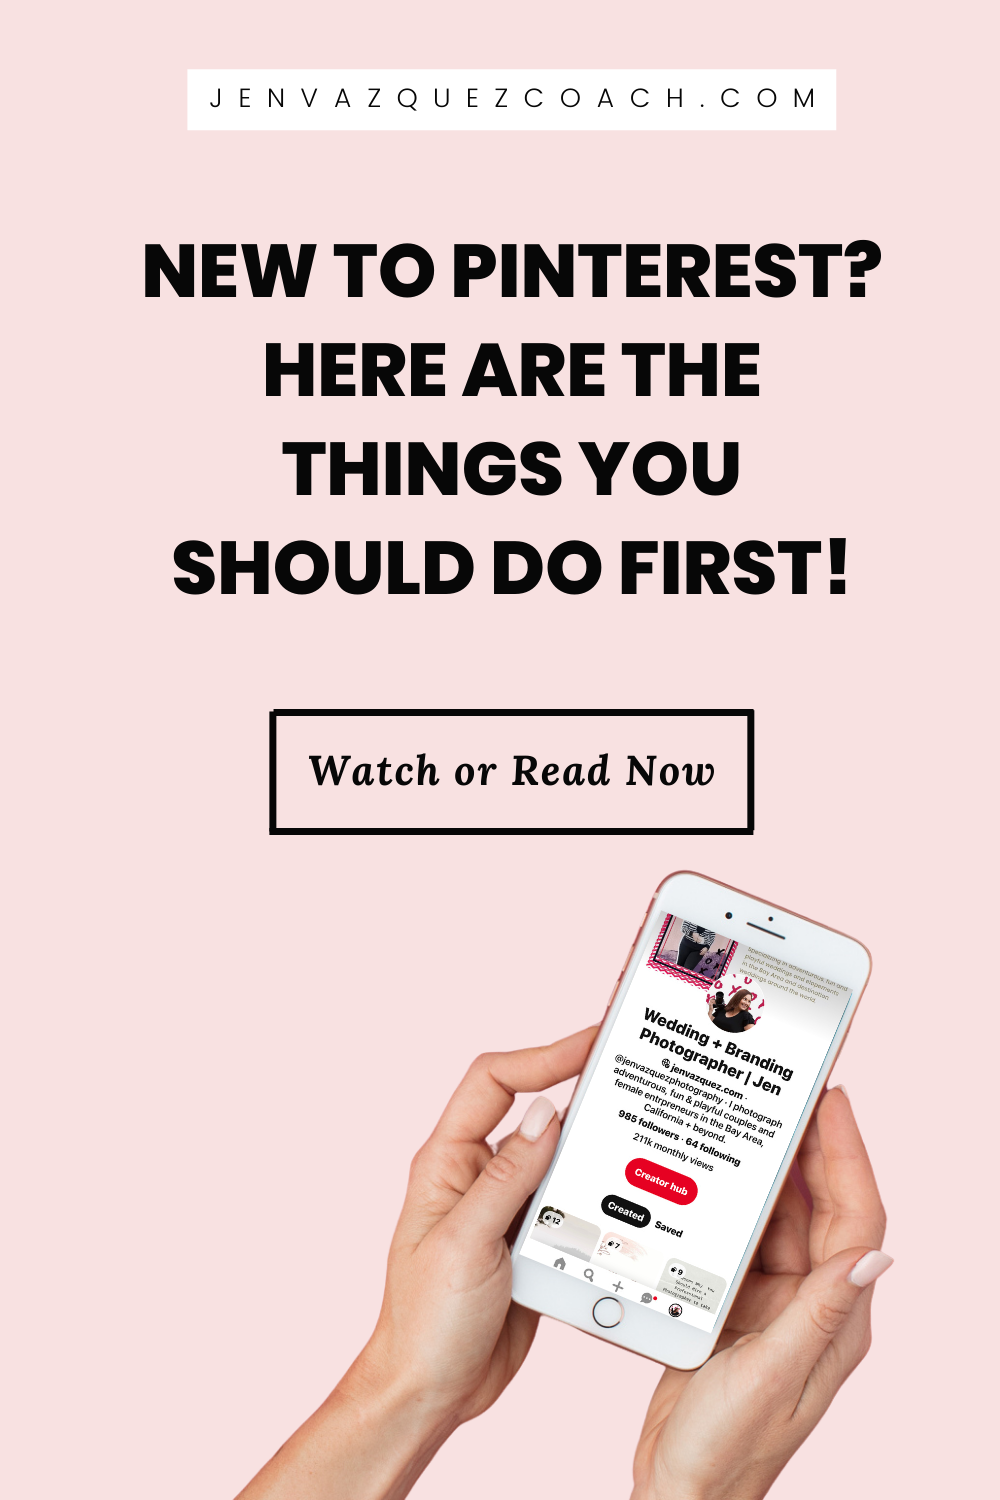 10 Things You Need to Do When Getting Started on Pinterest by Jen Vazauez